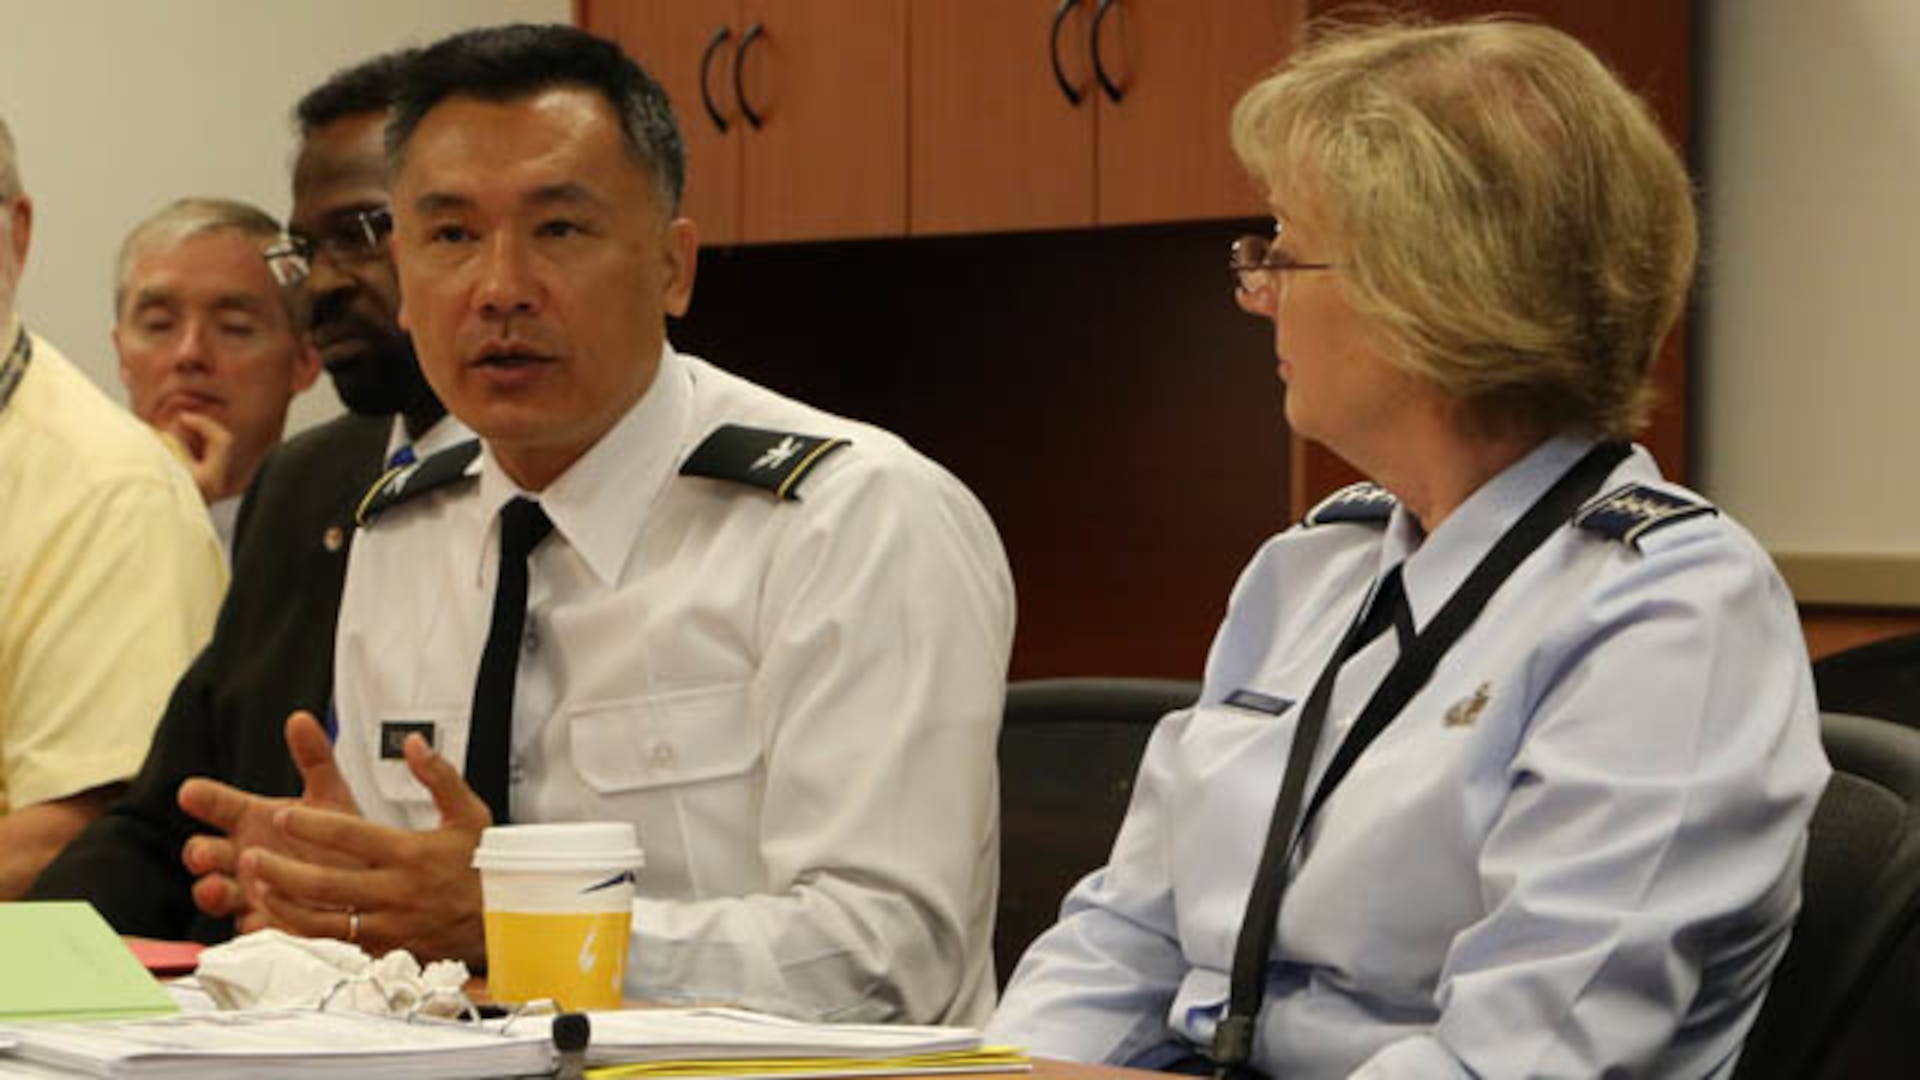 Army Col. William Robare speaks with Air Force Lt. Gen. Wendy Masiello, Defense Contract Management Agency director, during a 2015 visit to DCMA Detroit. Robare will depart Detroit June 21 after 40 months in command. 